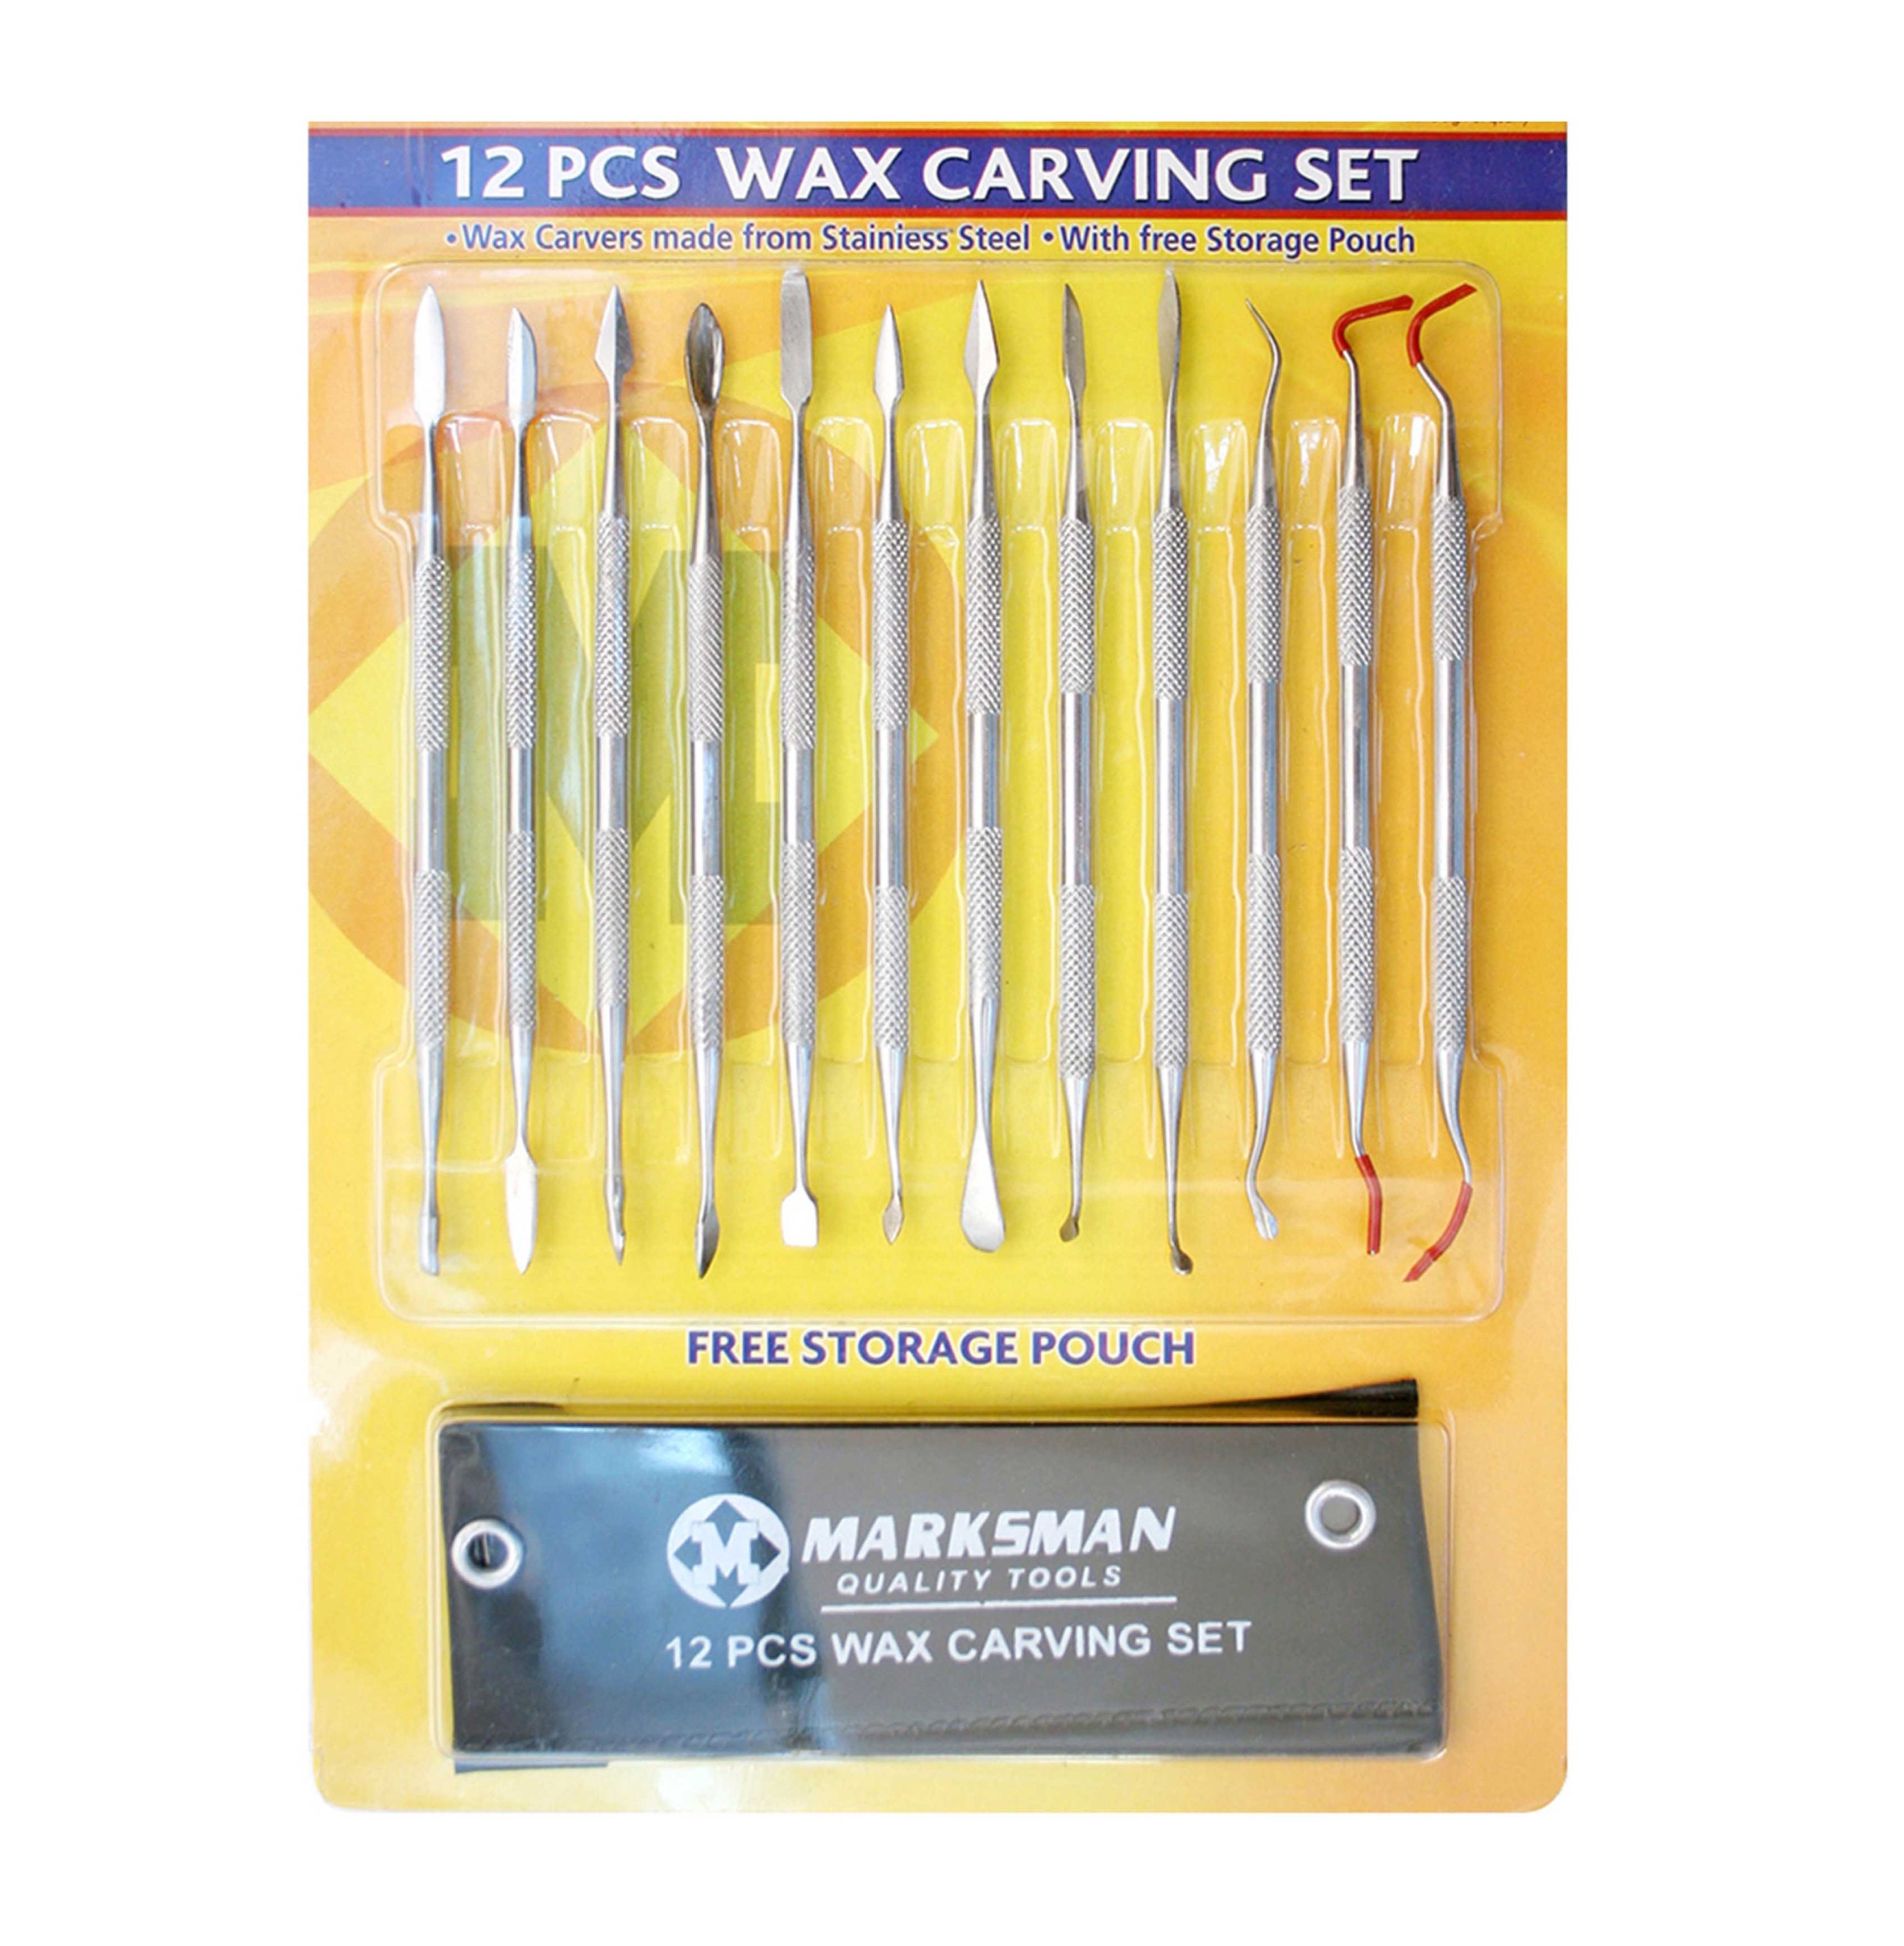 6 Pcs Wax Carving Tool Set, Stainless Steel Double-Sized Tools